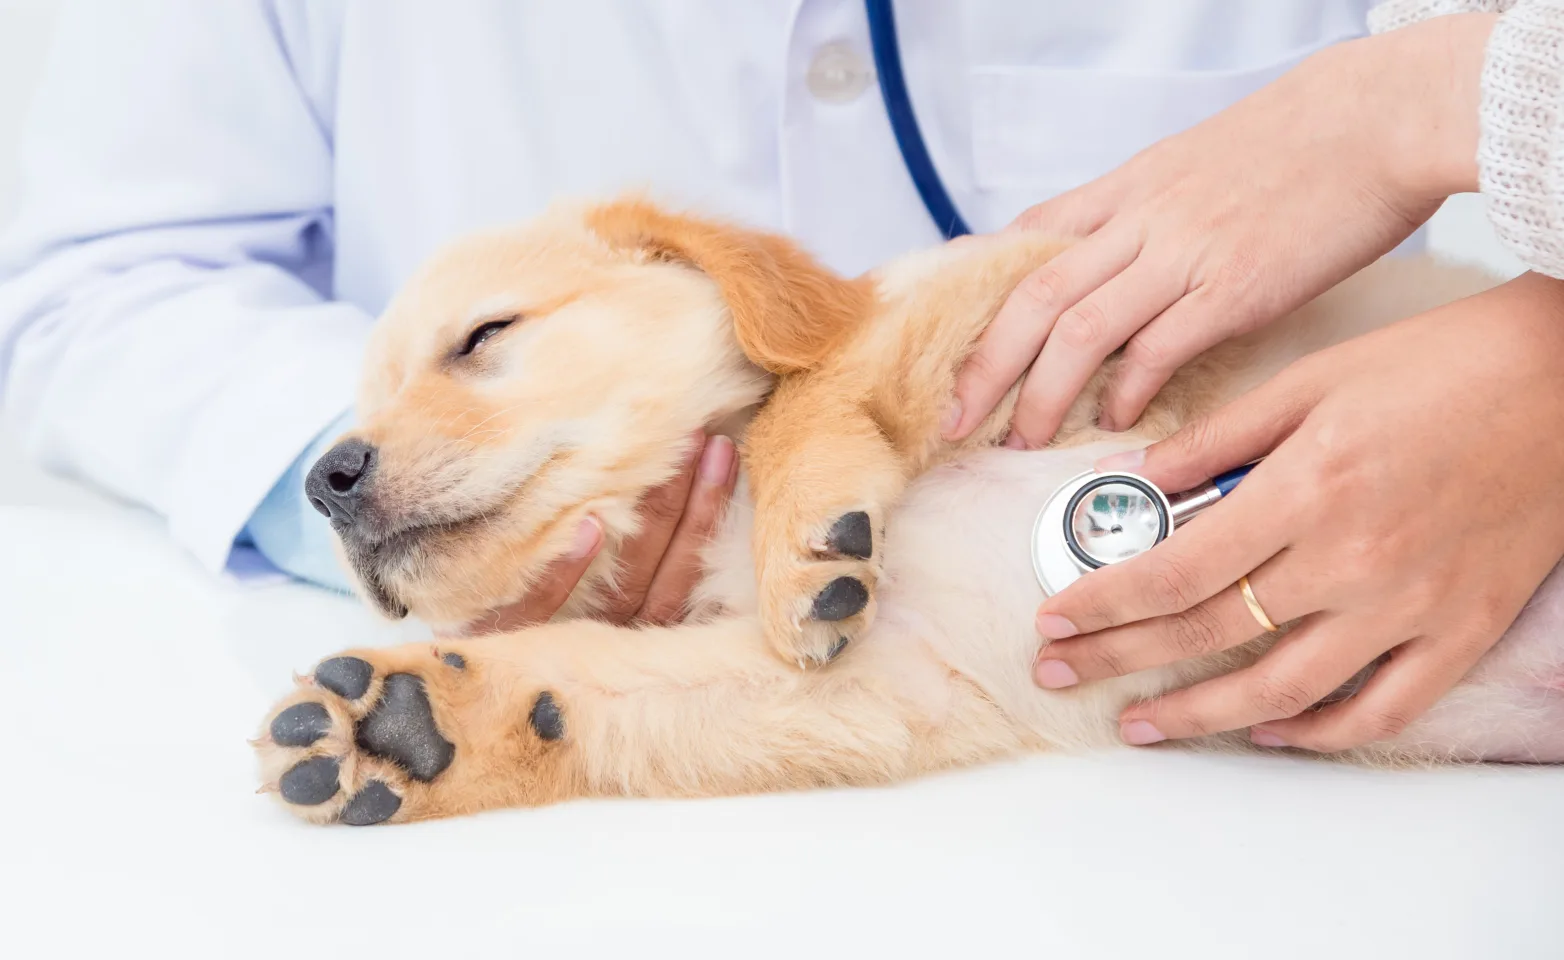 Puppy on table being examined with a stethoscope